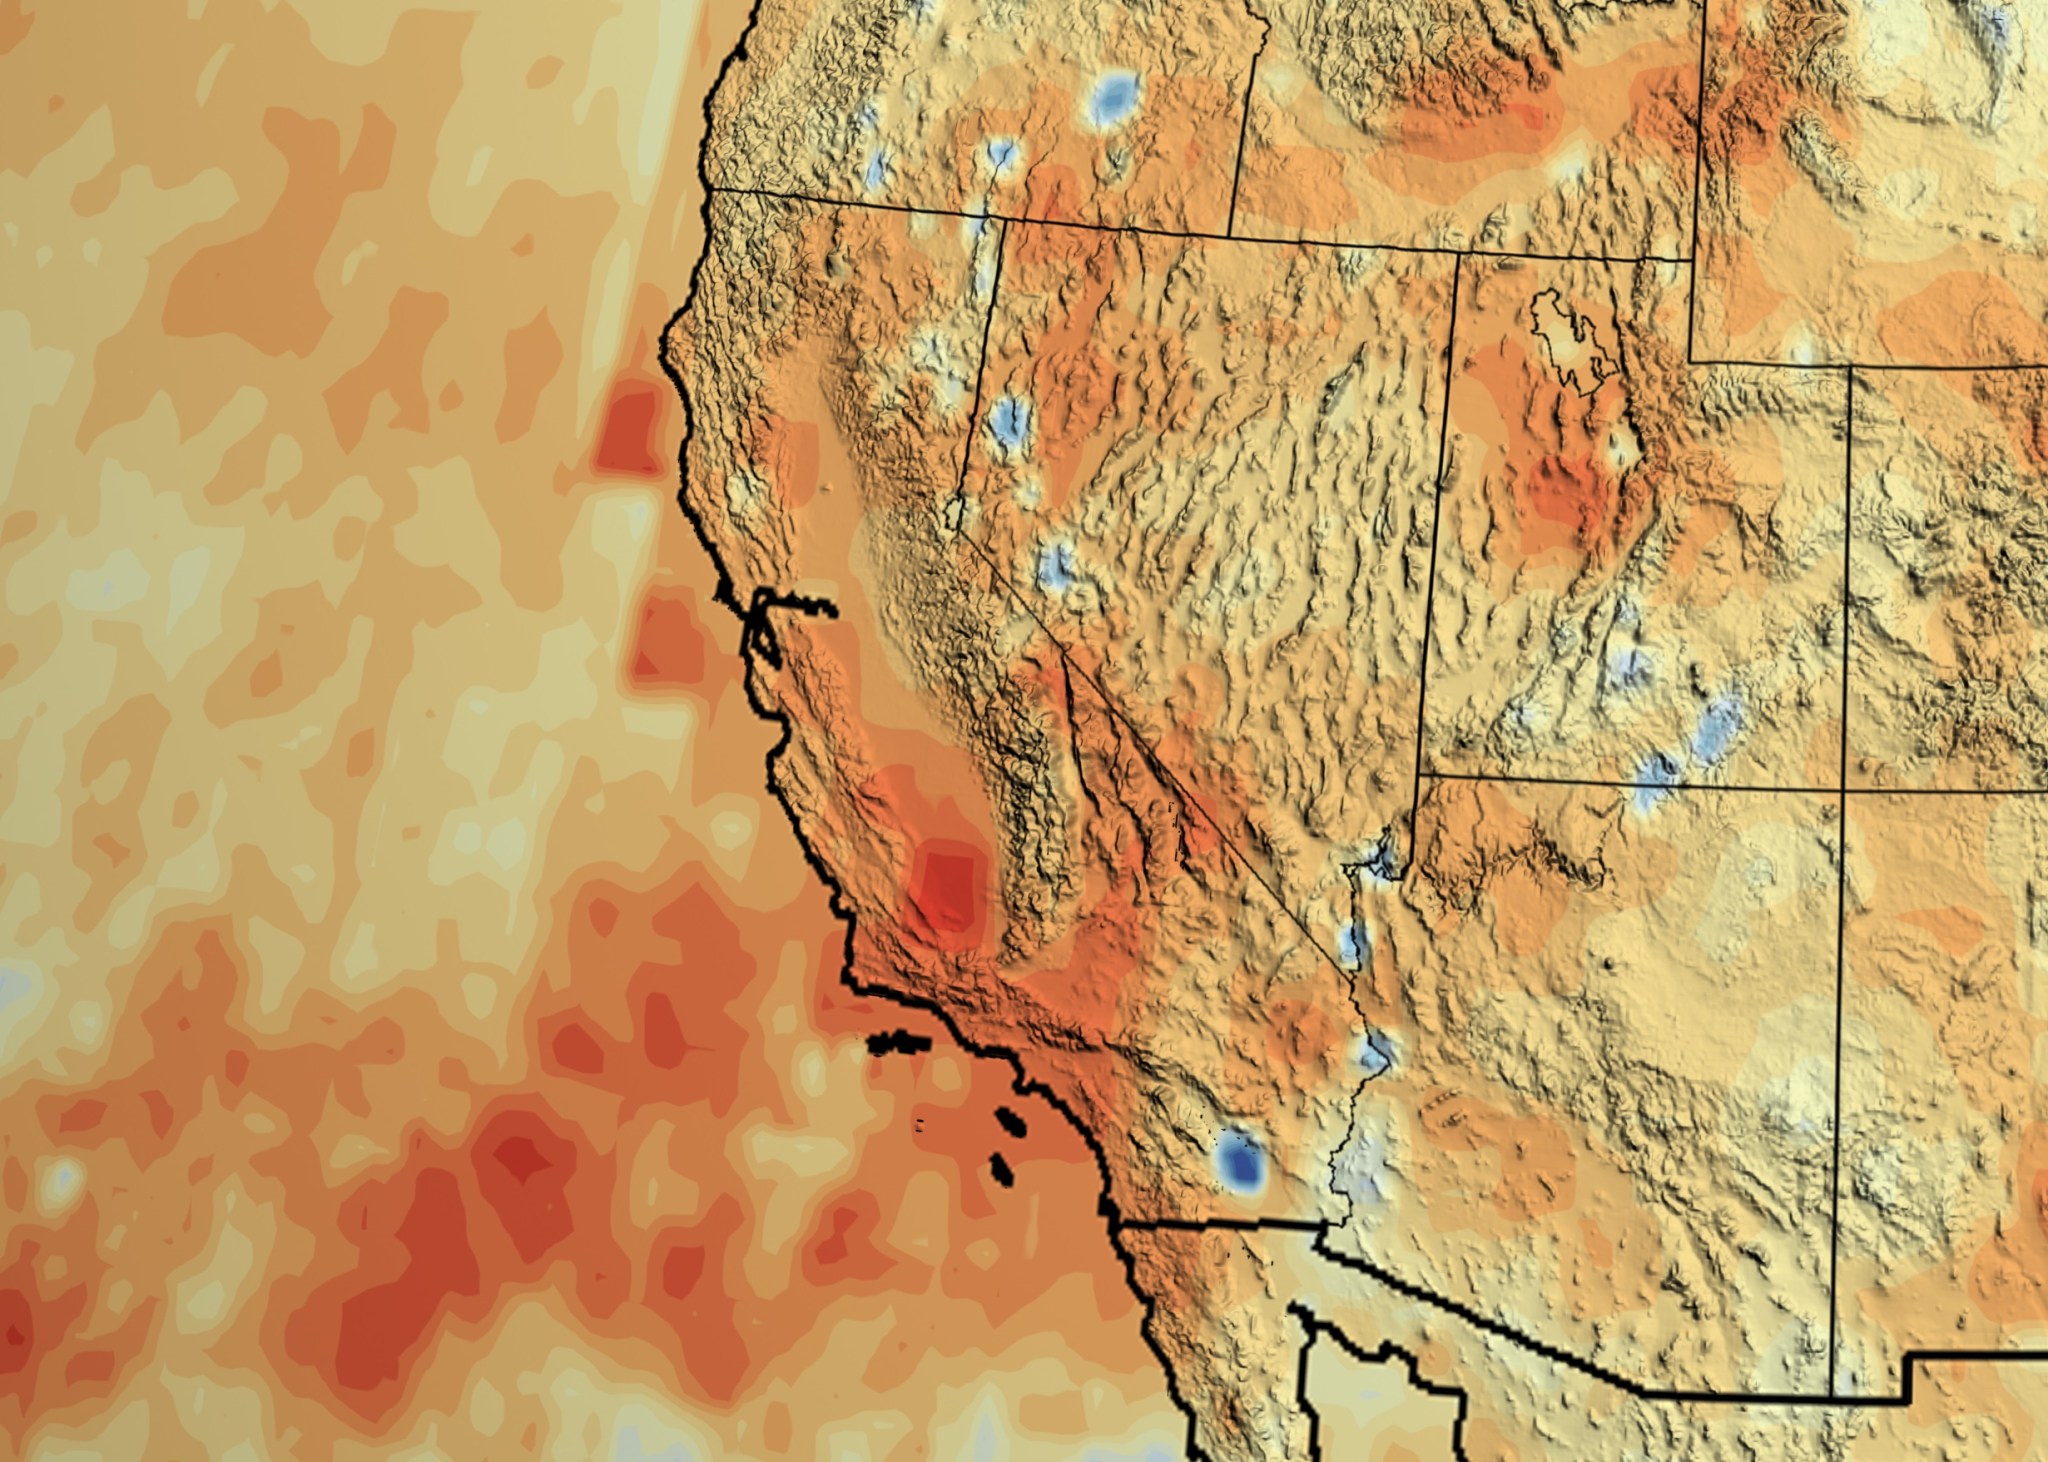 California's accumulated precipitation “deficit” from 2012 to 2014 from satellite data.